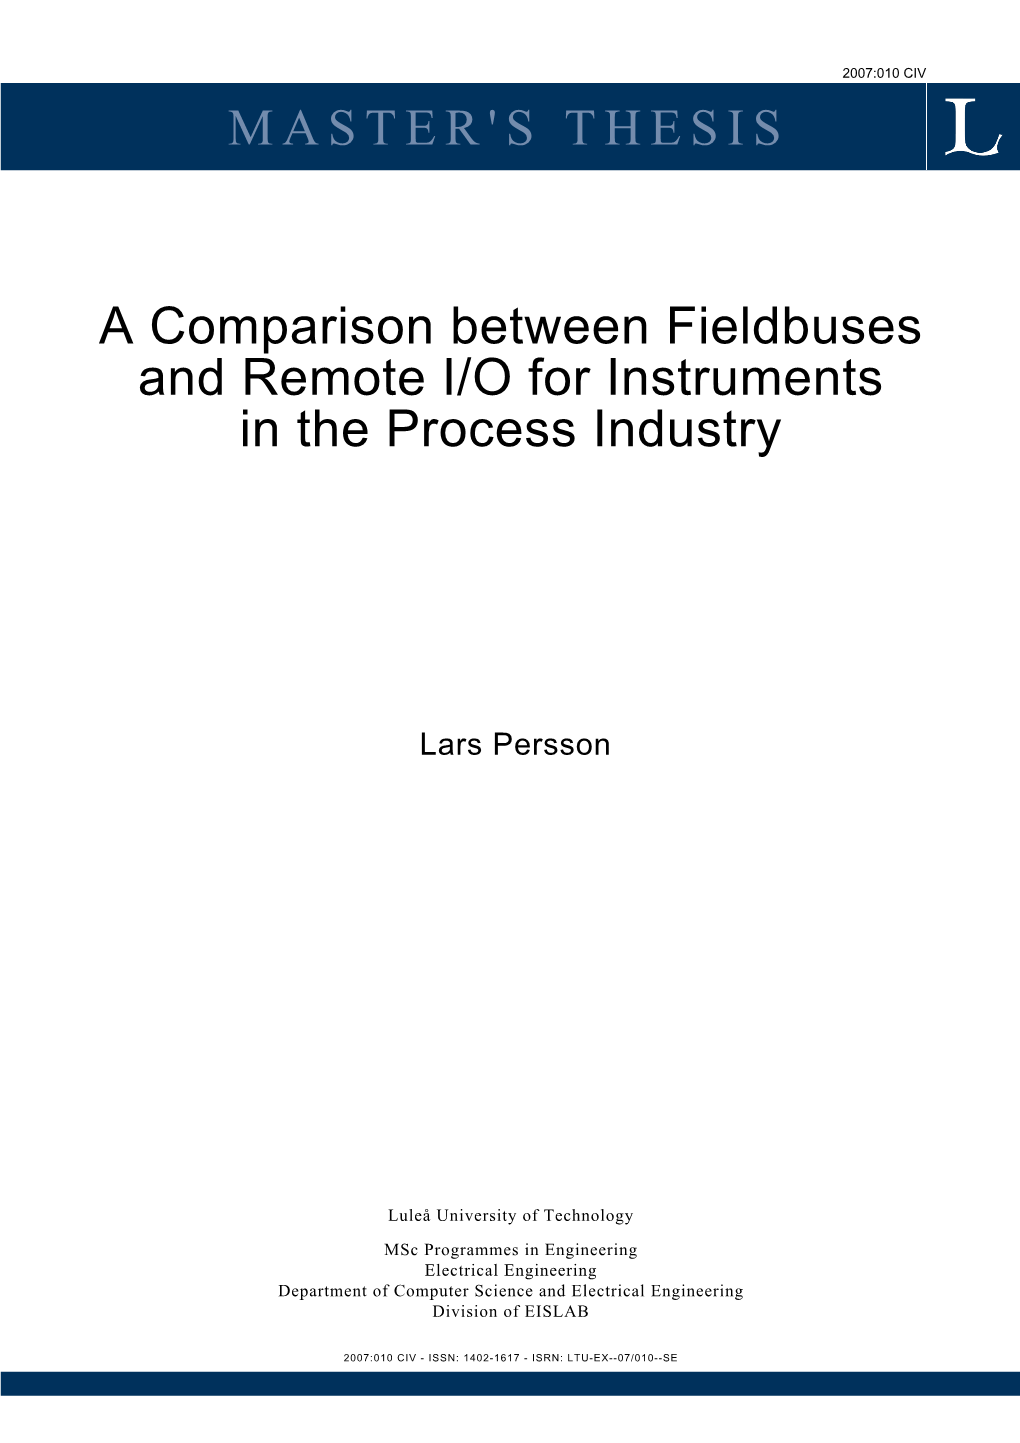 A Comparison Between Fieldbuses and Remote I/O for Instruments in the Process Industry